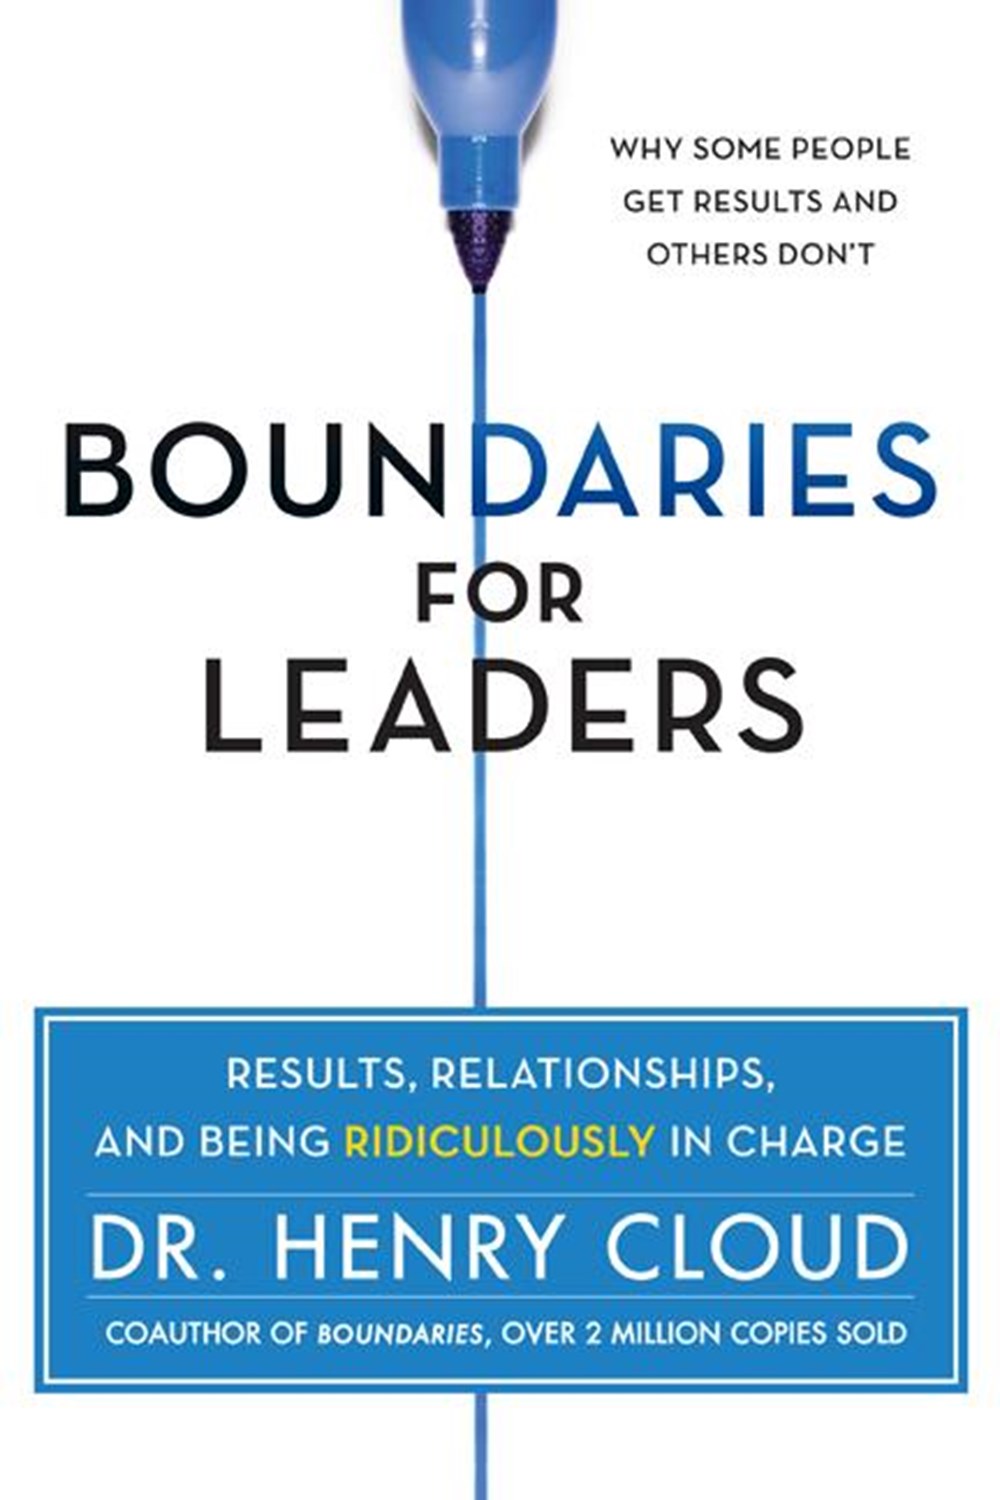 Boundaries for Leaders Results, Relationships, and Being Ridiculously in Charge